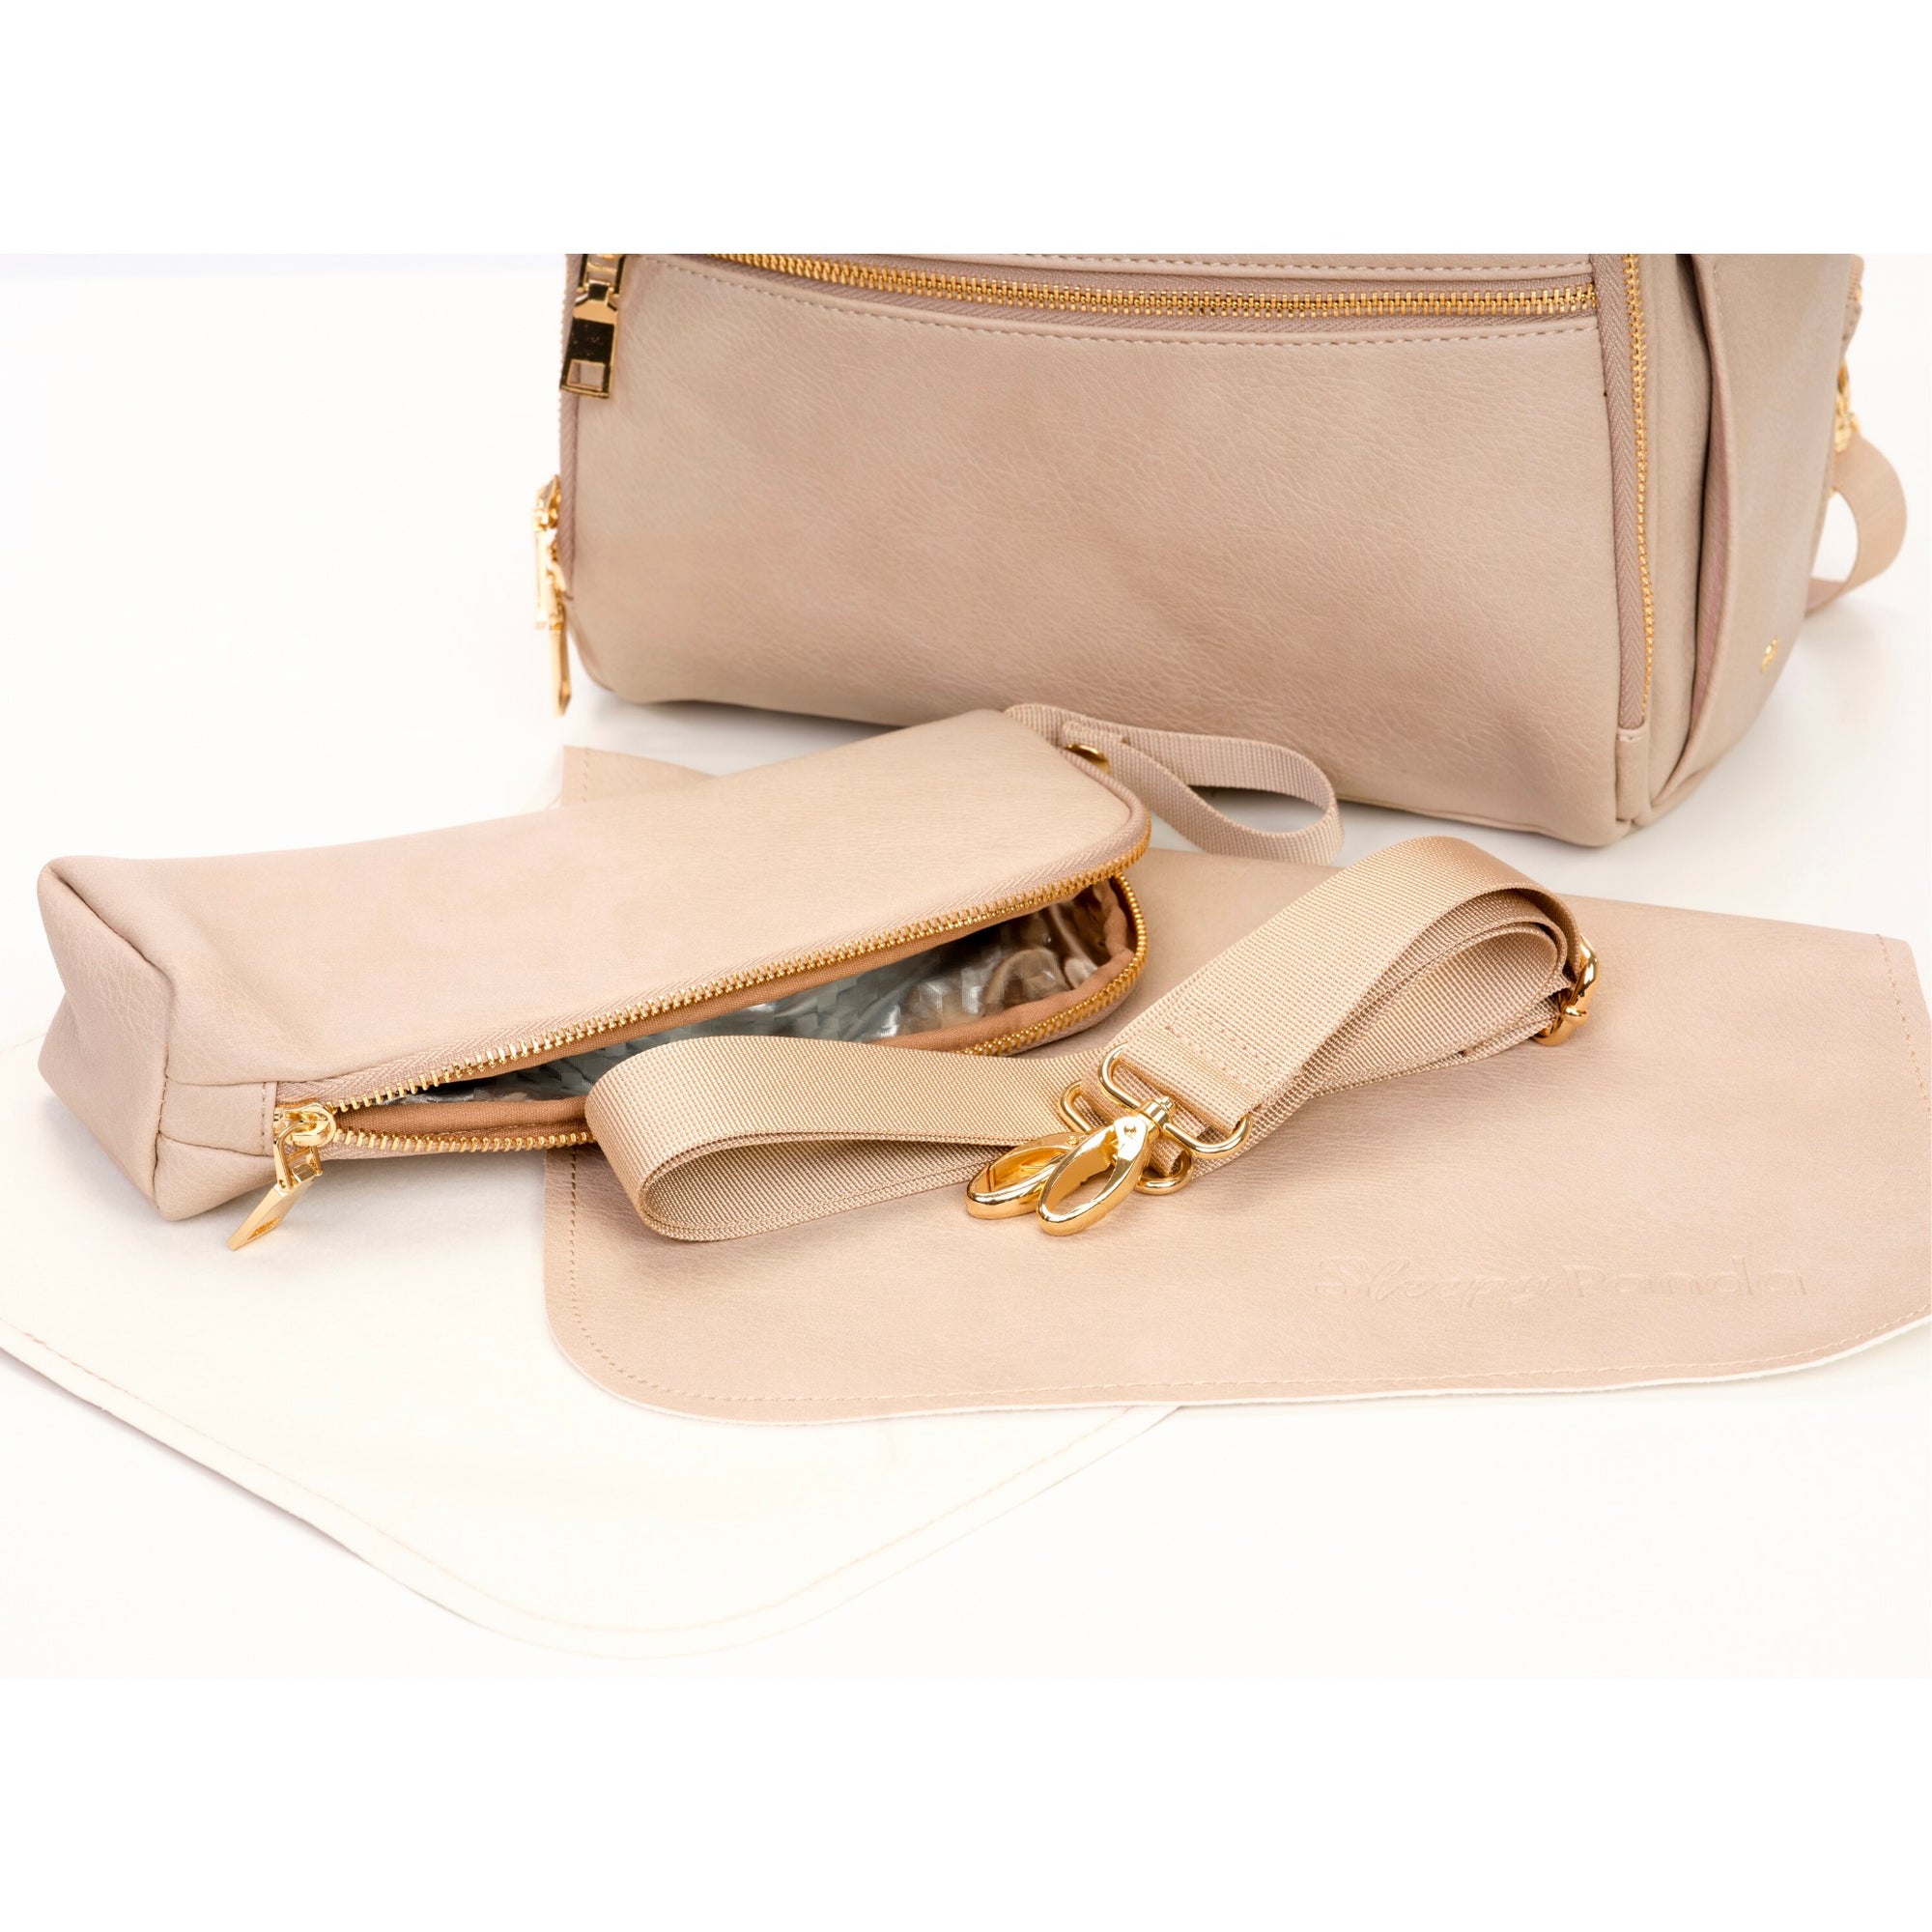 Limited Time: FREE Bailey Bag 4-Piece Accessory Pack Taupe (Valued at $80)